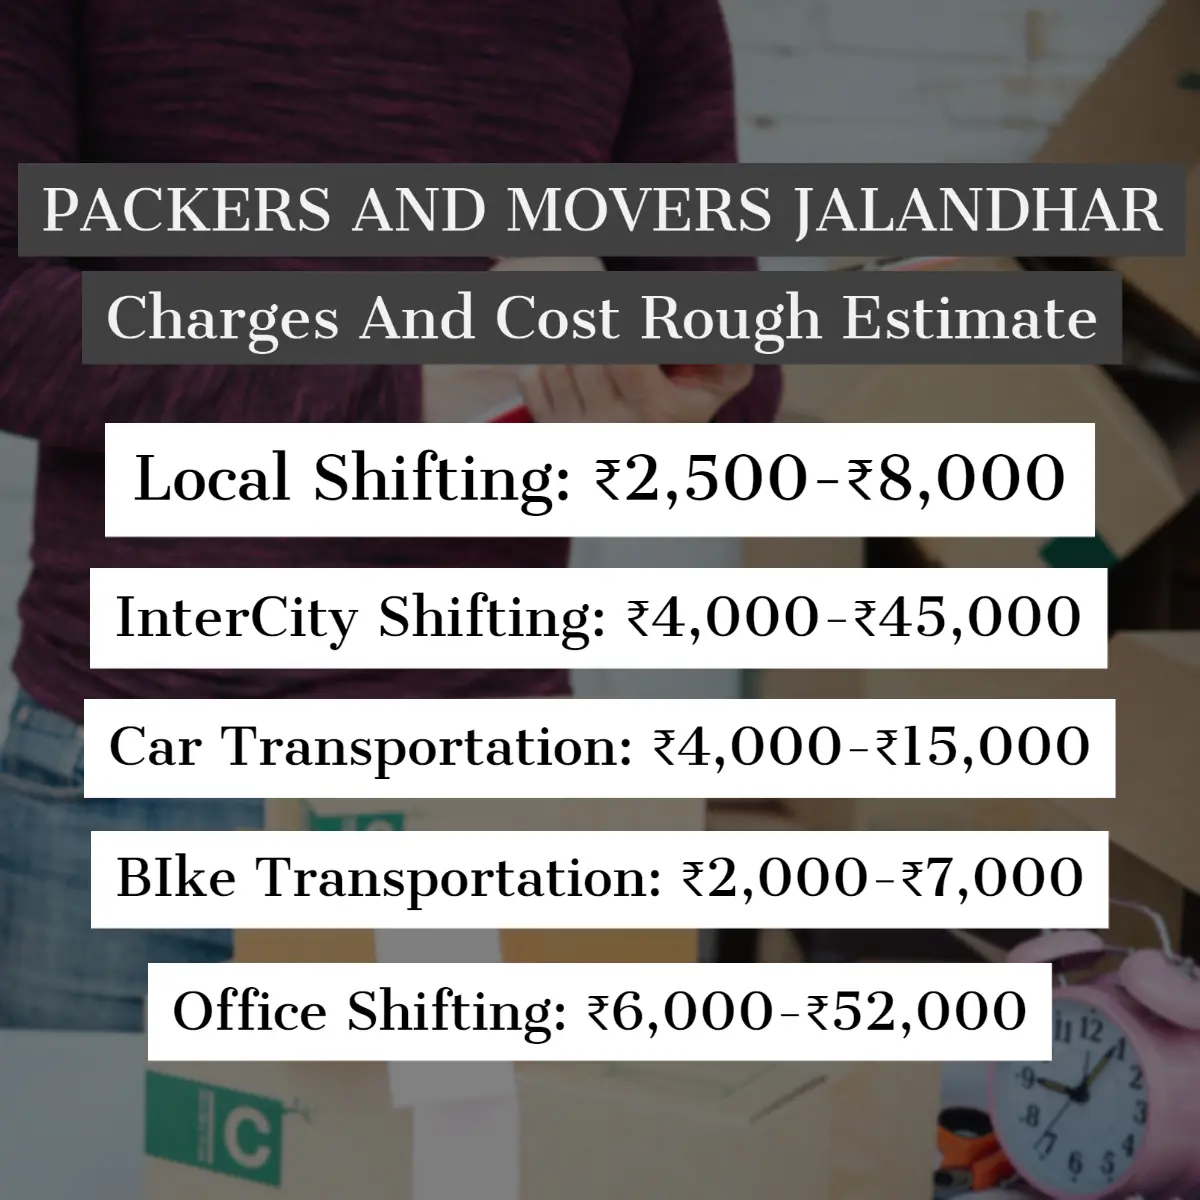 Packers and Movers Jalandhar Charges